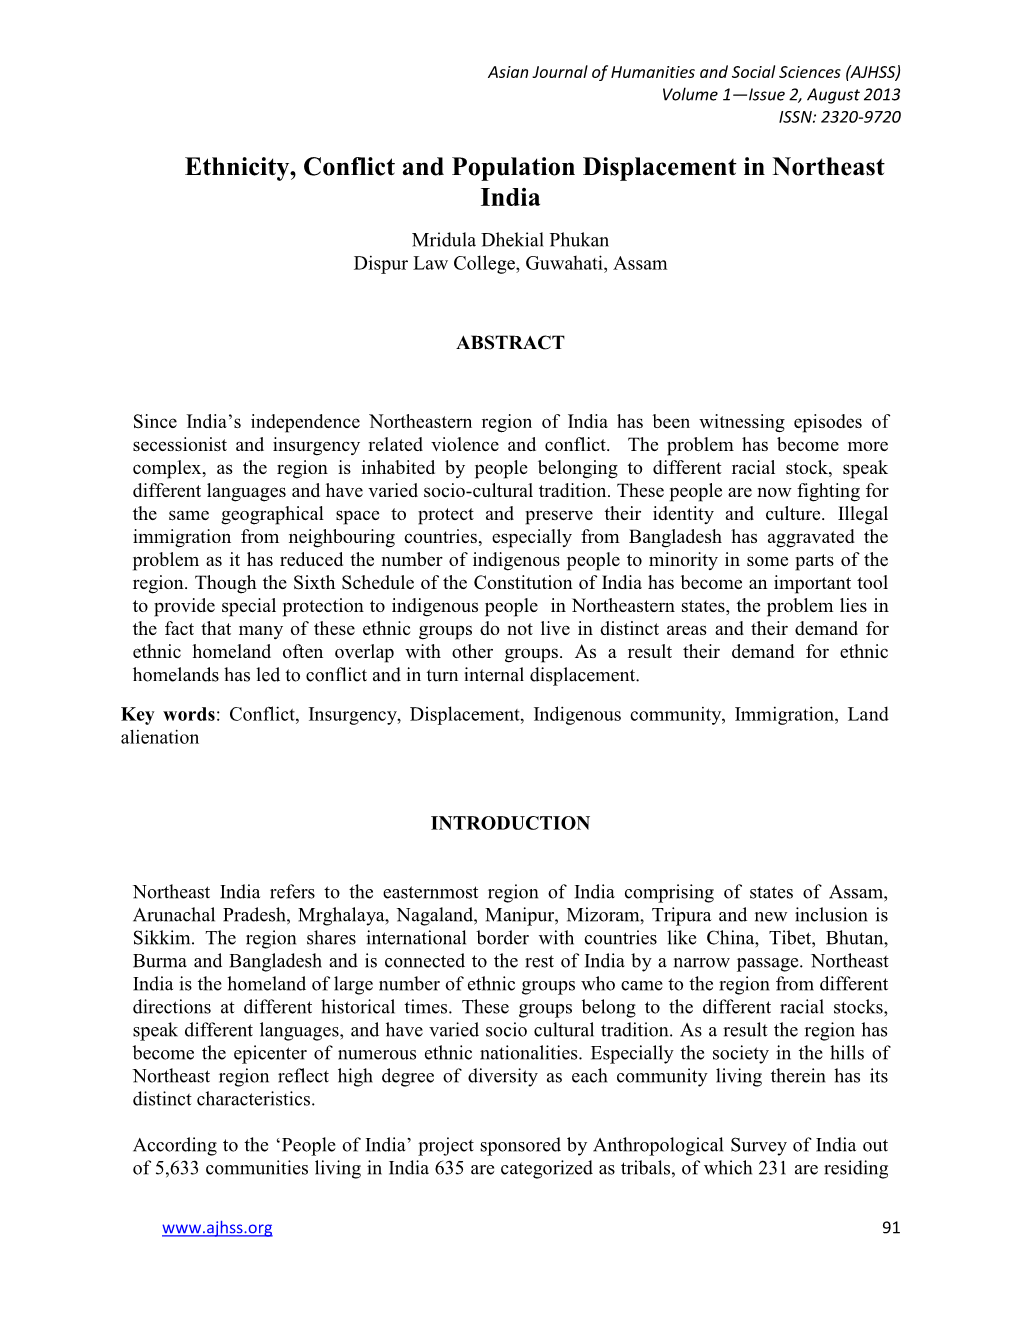 Ethnicity, Conflict and Population Displacement in Northeast India Mridula Dhekial Phukan Dispur Law College, Guwahati, Assam